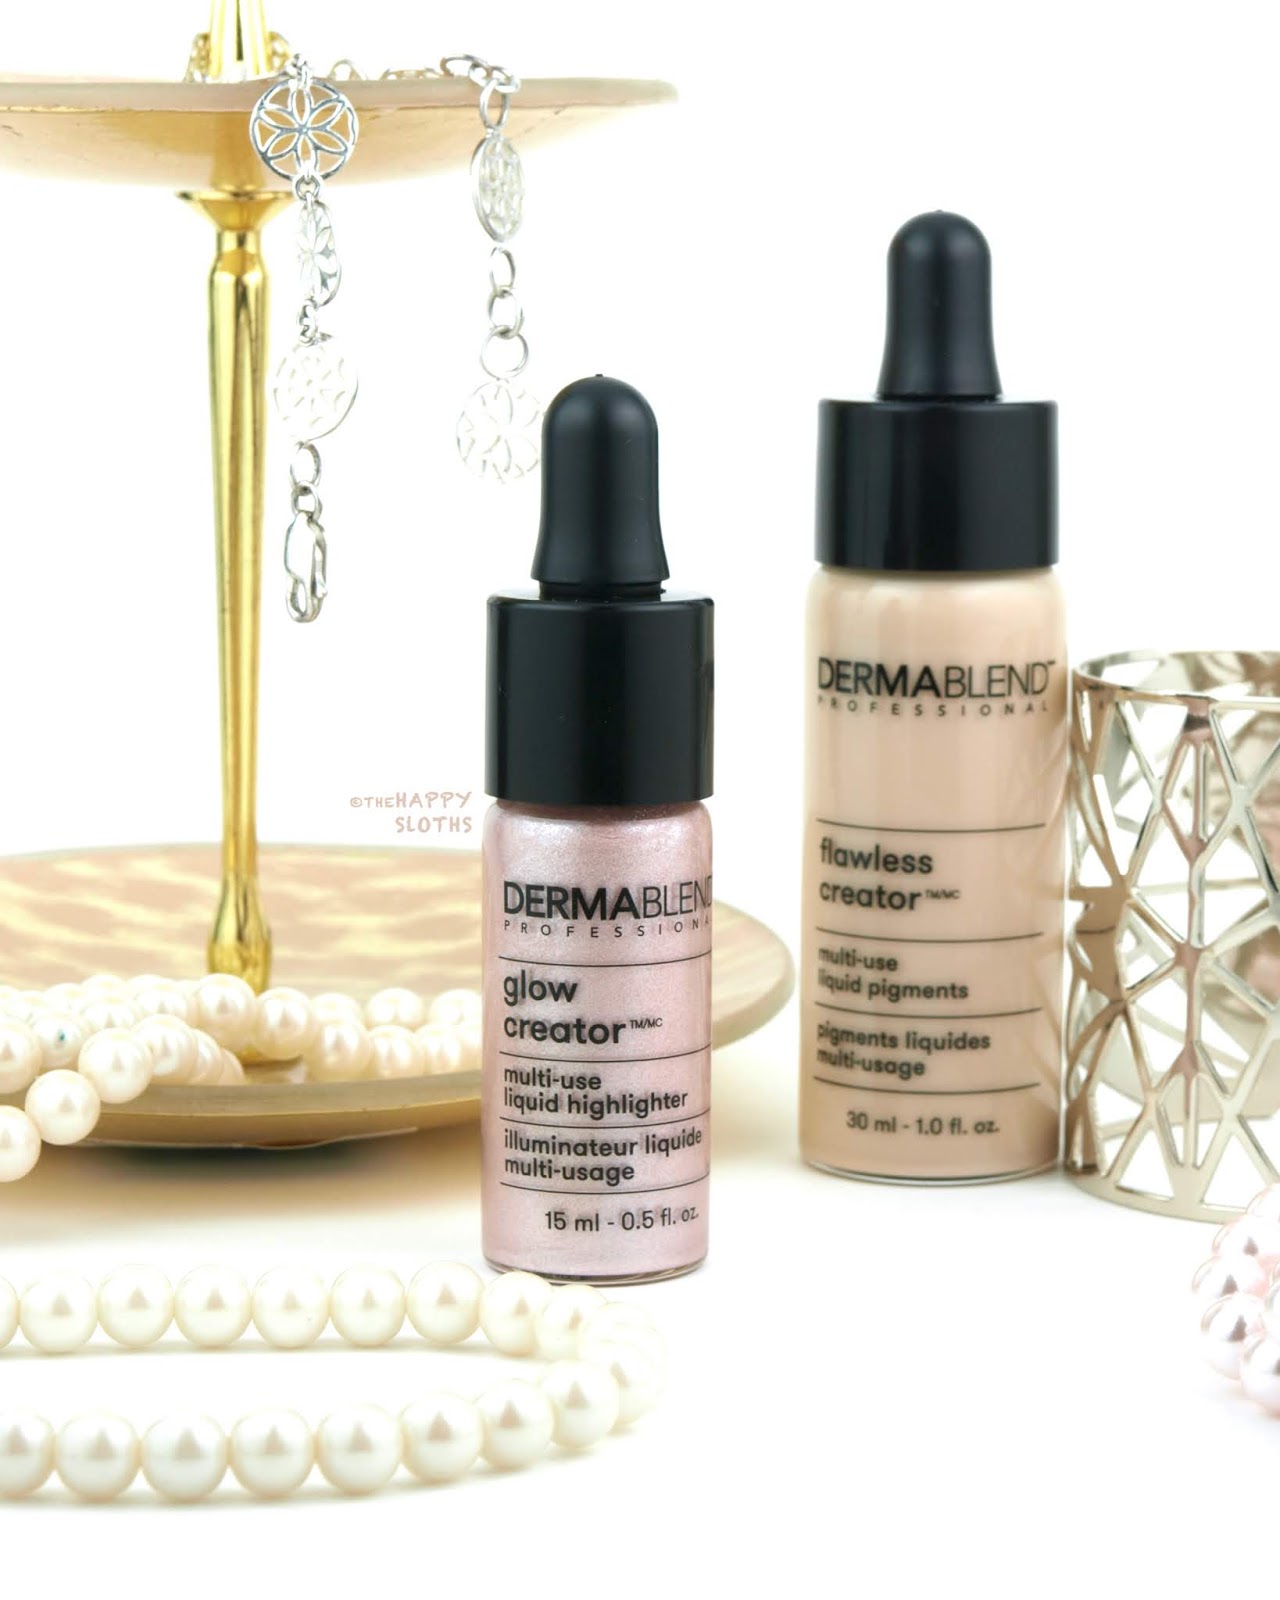 Dermablend | Glow Creator Multi-Use Liquid Highlighter in "Pearl": Review and Swatches